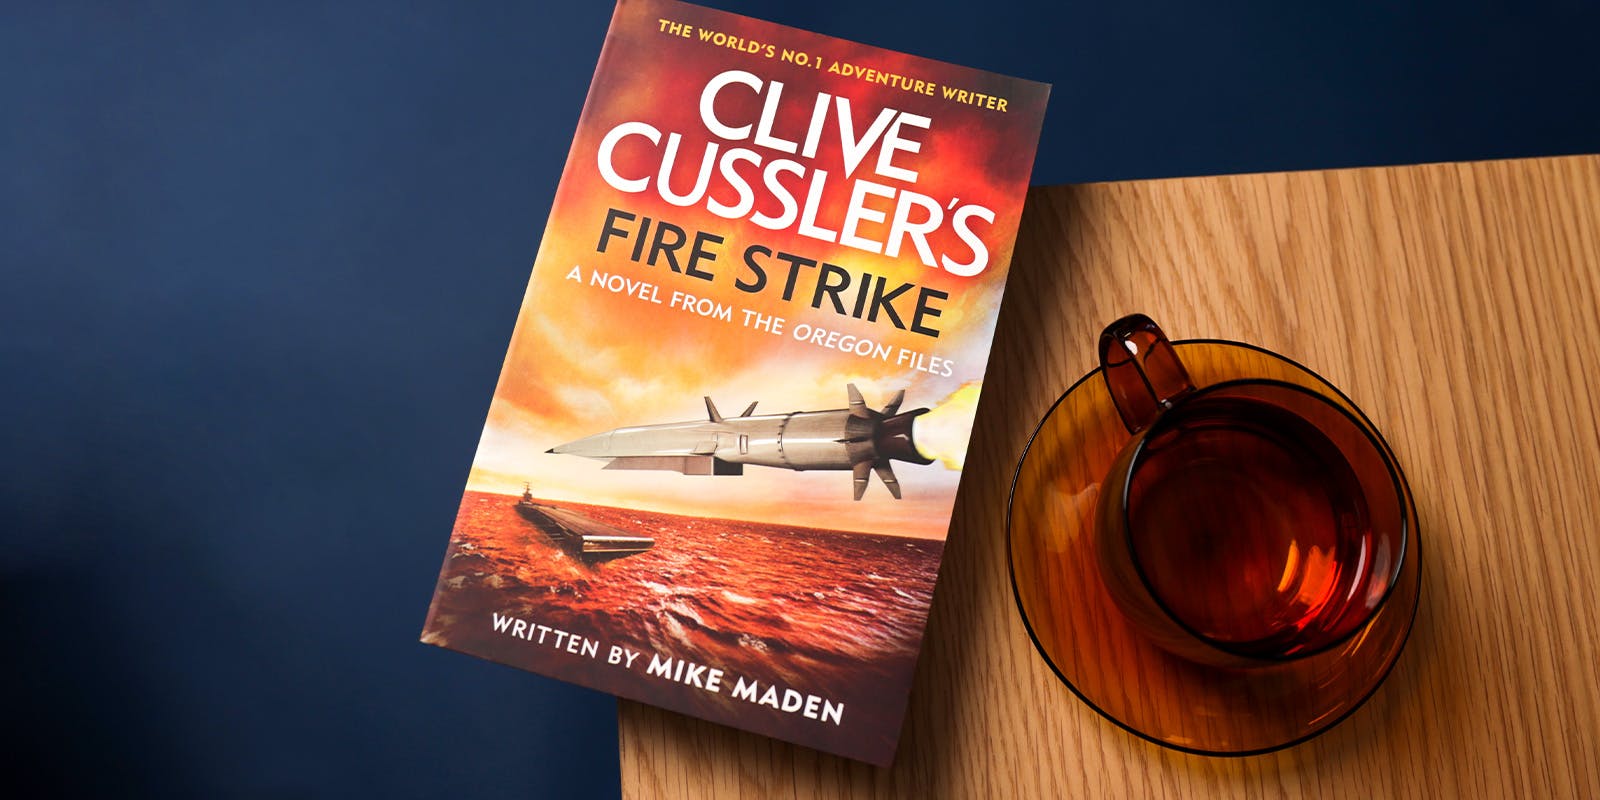 5 fun facts about Clive Cussler